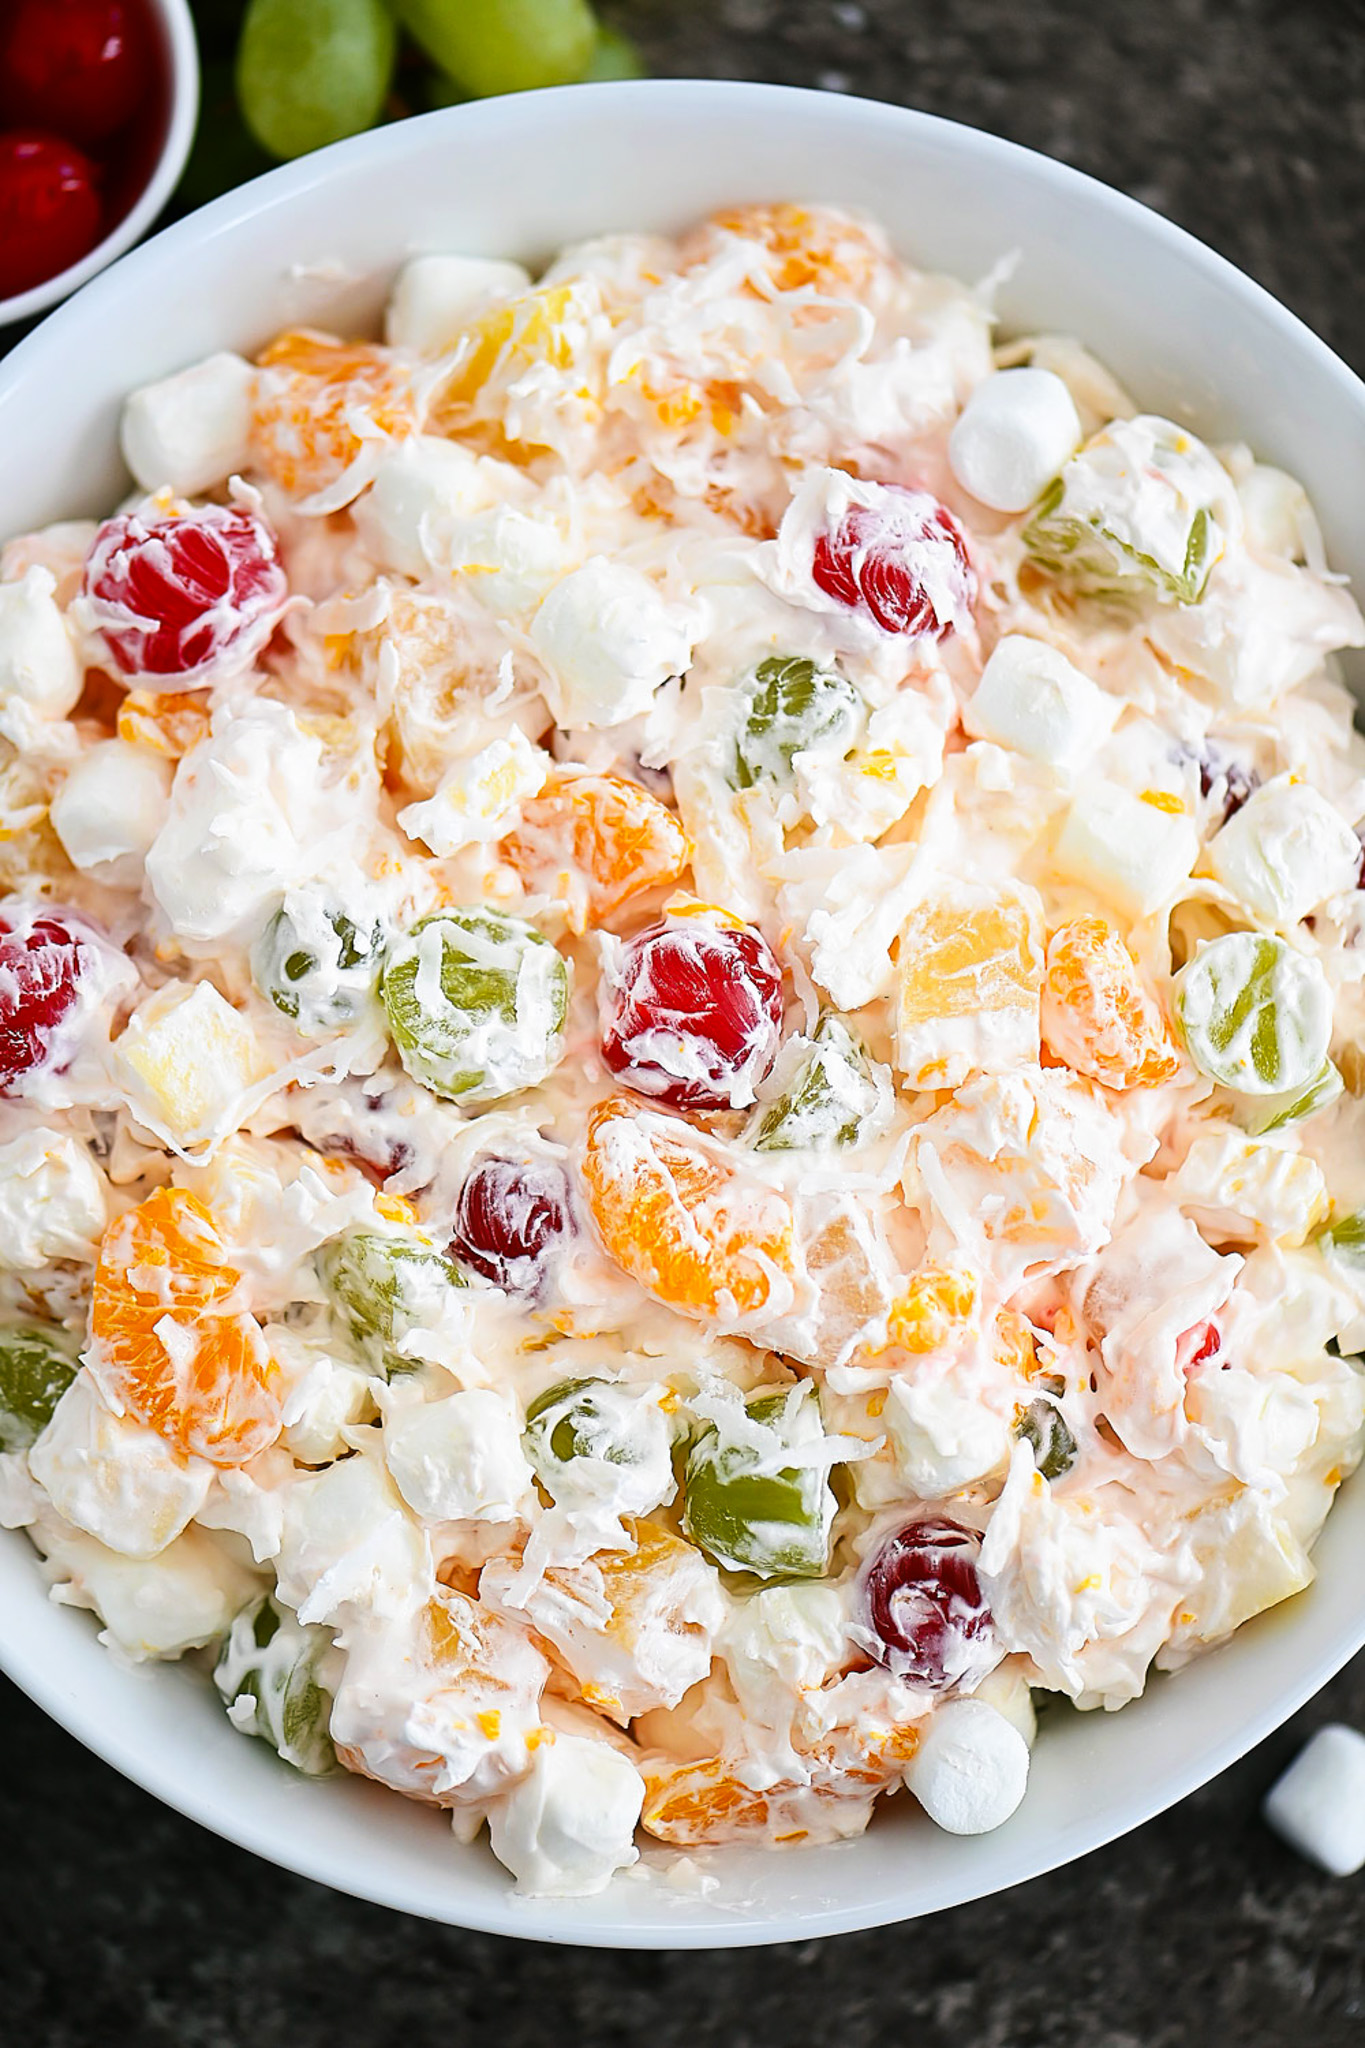 Ambrosia salad has apples, oranges, pineapples and grapes all tossed together in whipped topping and shredded coconut. Life-in-the-Lofthouse.com